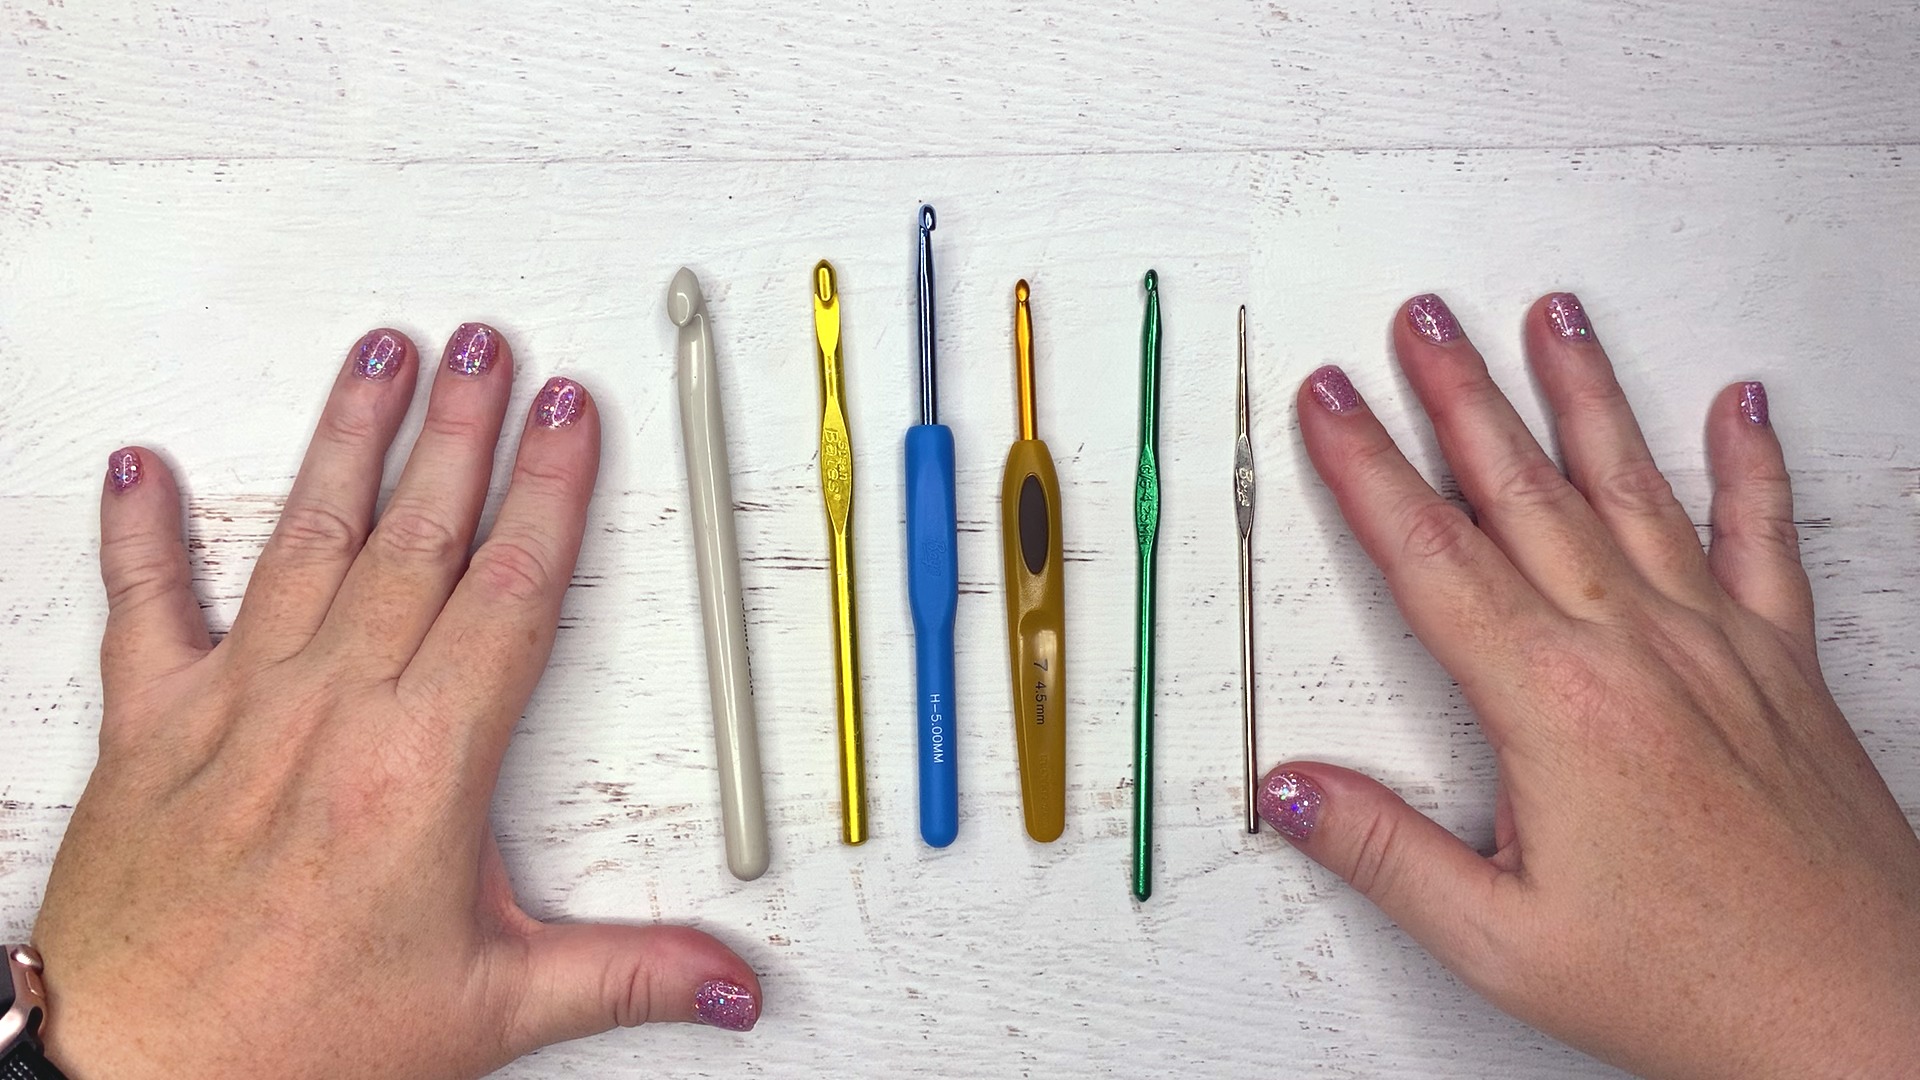 Crochet Hook Size Chart: Which Hook Should I Use? - Petals to Picots